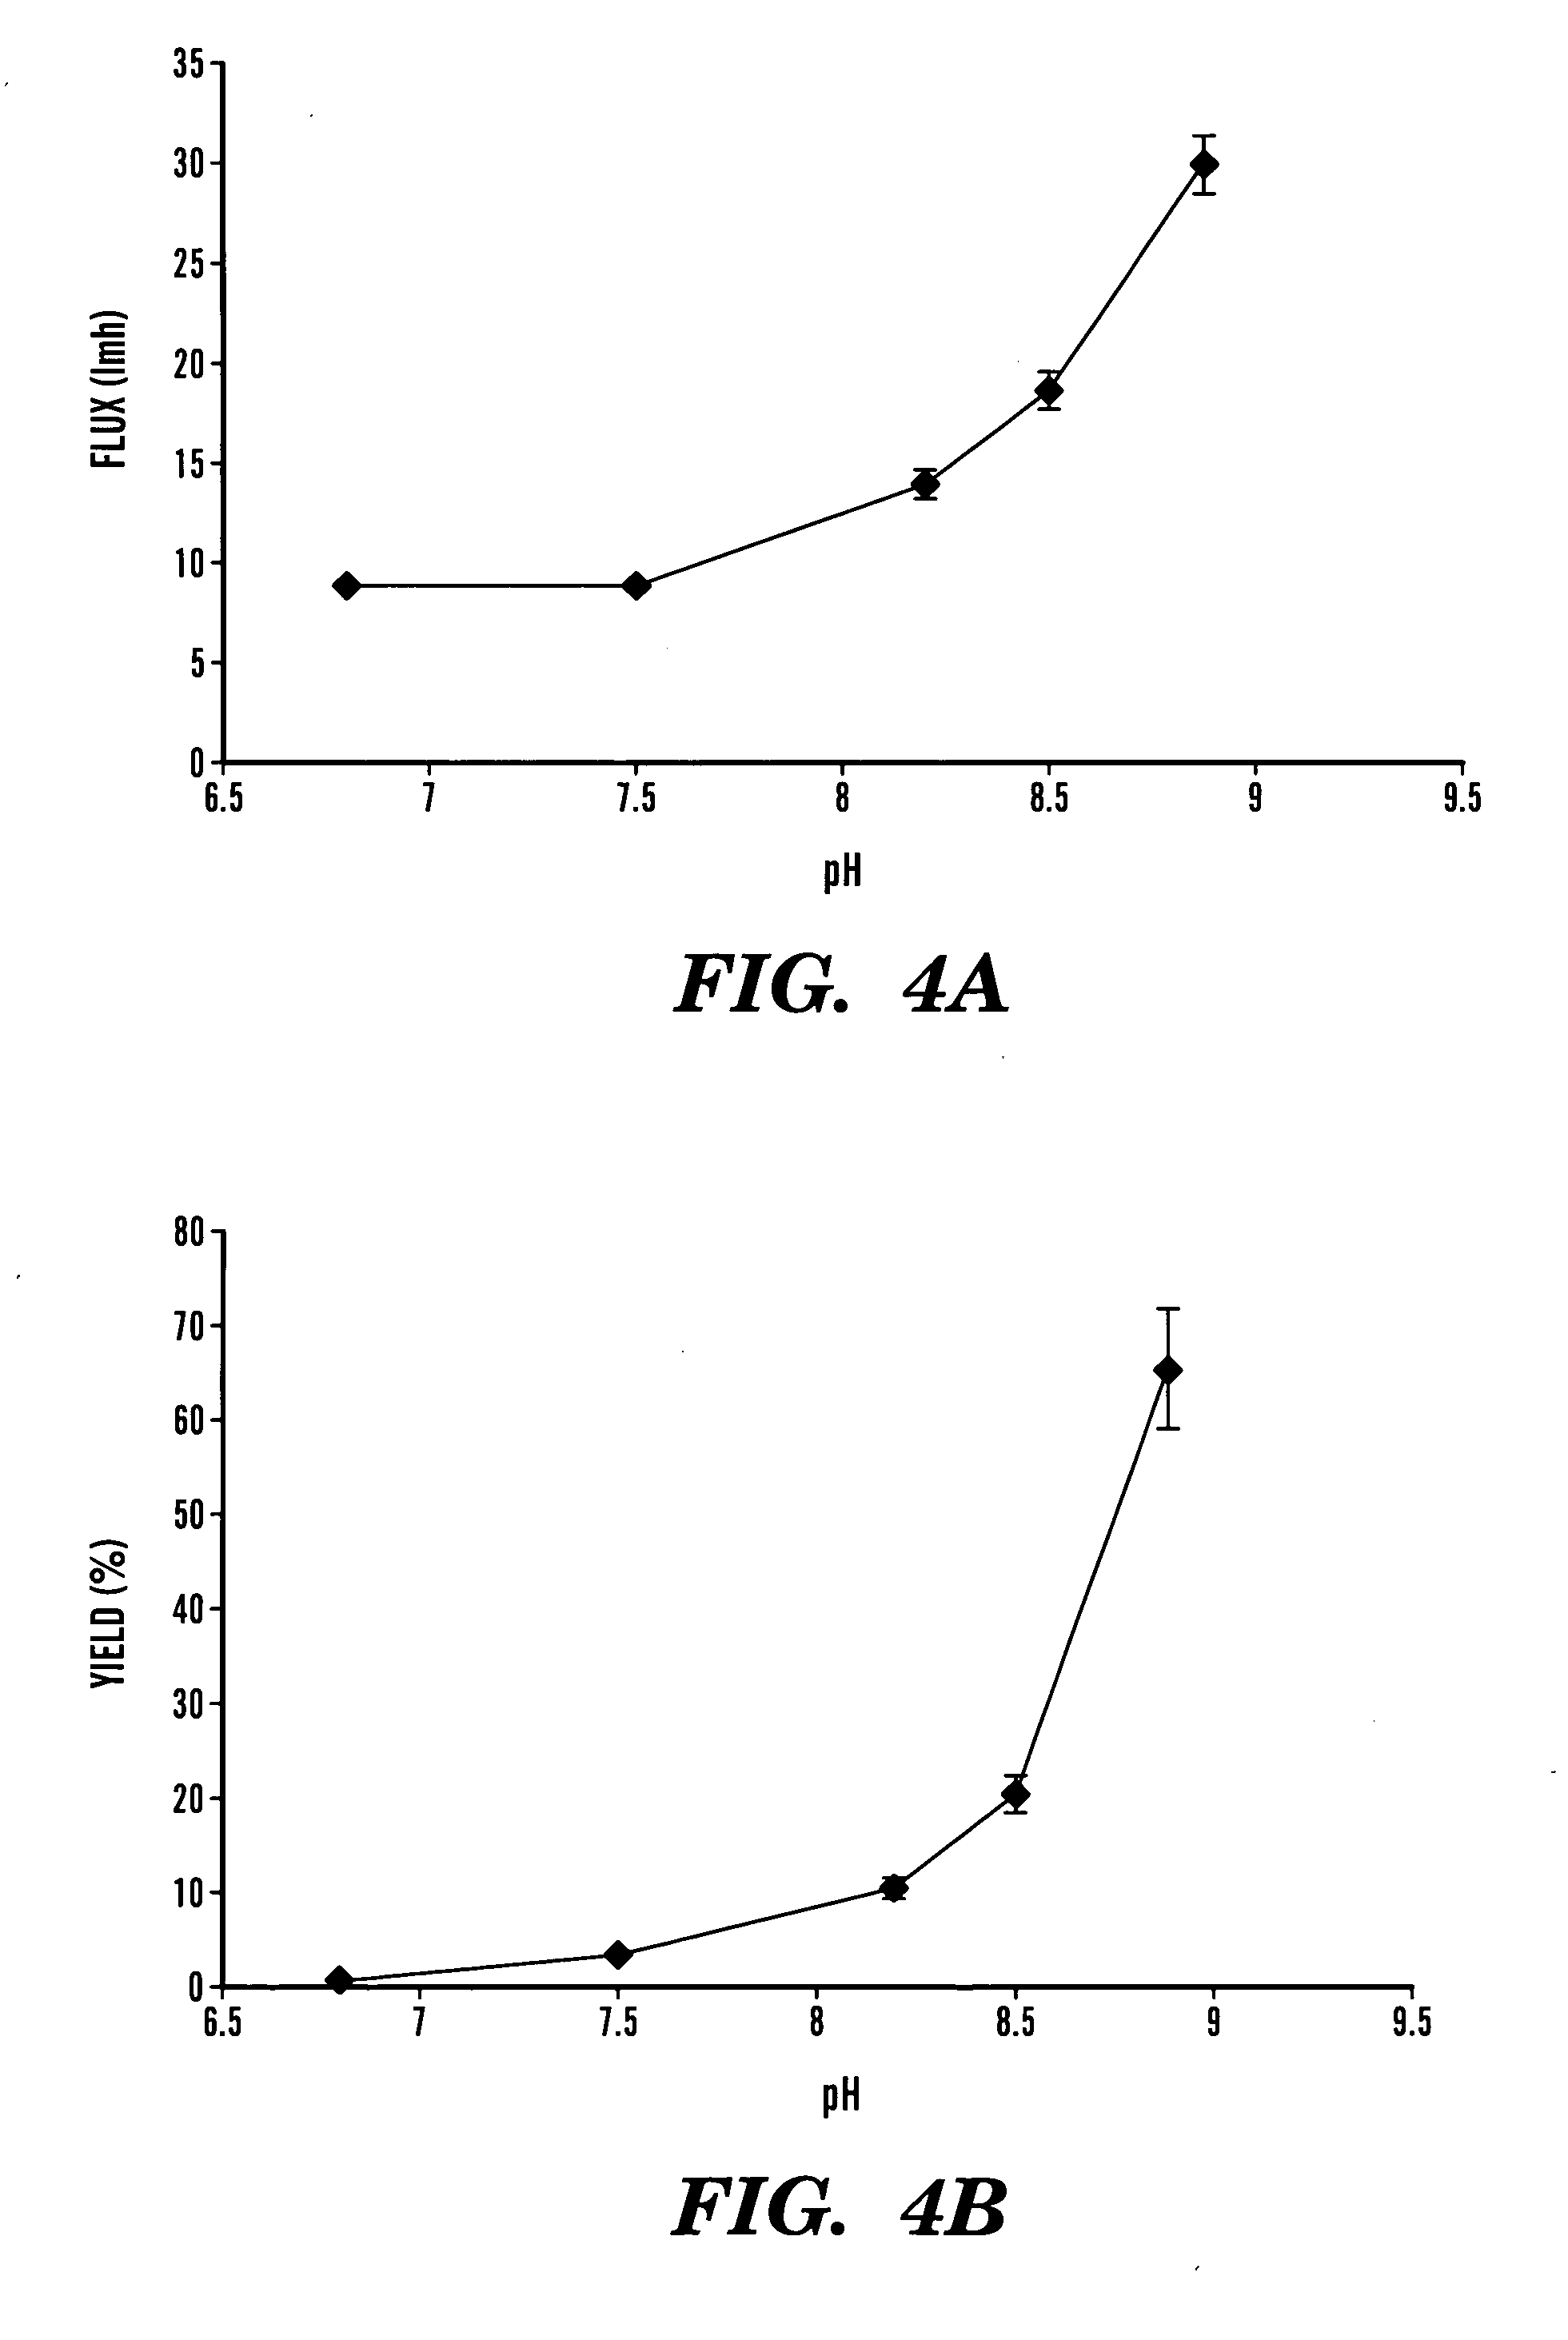 Microfiltration and/or ultrafiltration process for recovery of target molecules from polydisperse liquids